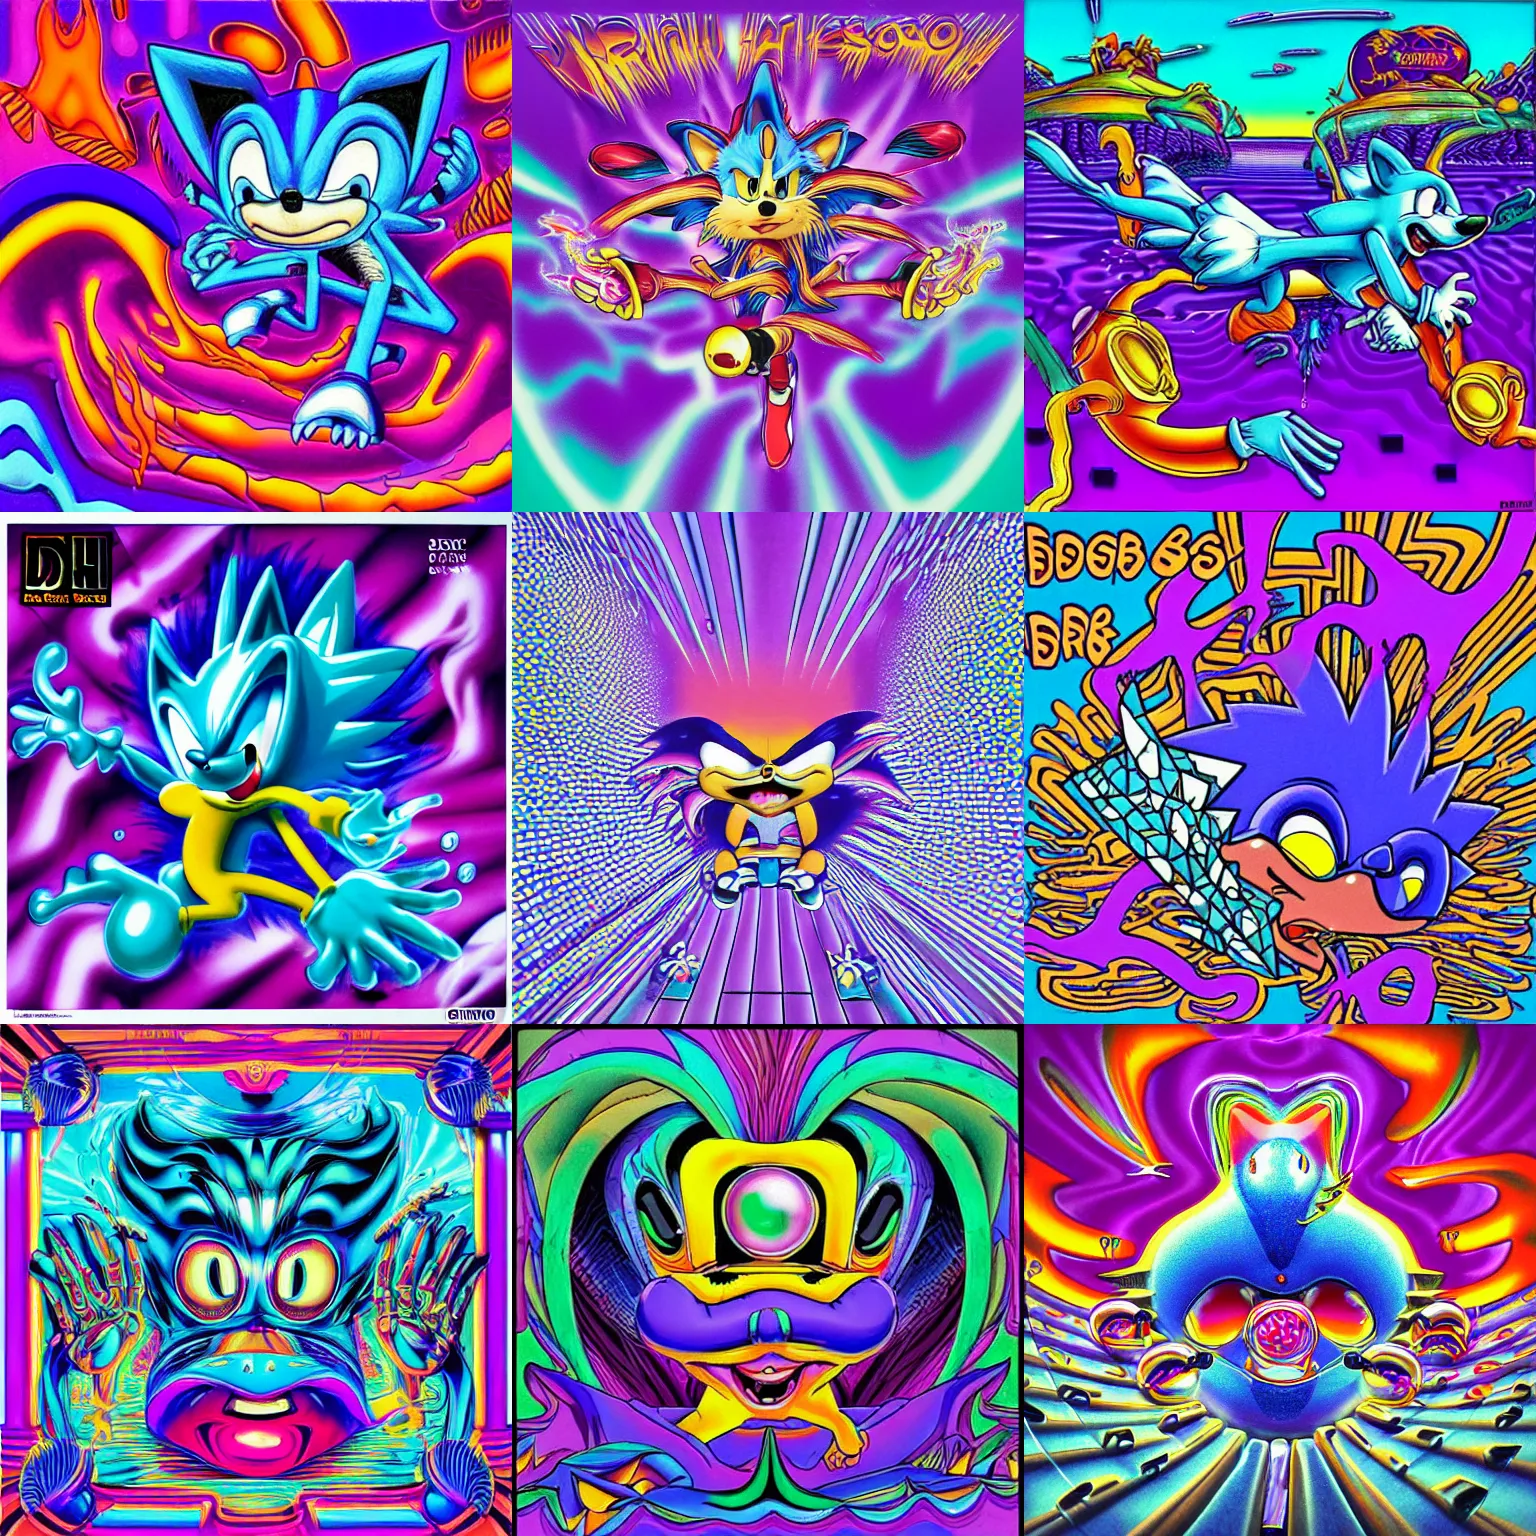 Prompt: surreal, sharp, lowbrow, detailed professional, high quality airbrush art MGMT album cover of a liquid dissolving LSD DMT blue sonic the hedgehog falling through a mirror ocean, purple checkerboard background, 1990s 1992 acid house techno Sega Genesis video game album cover